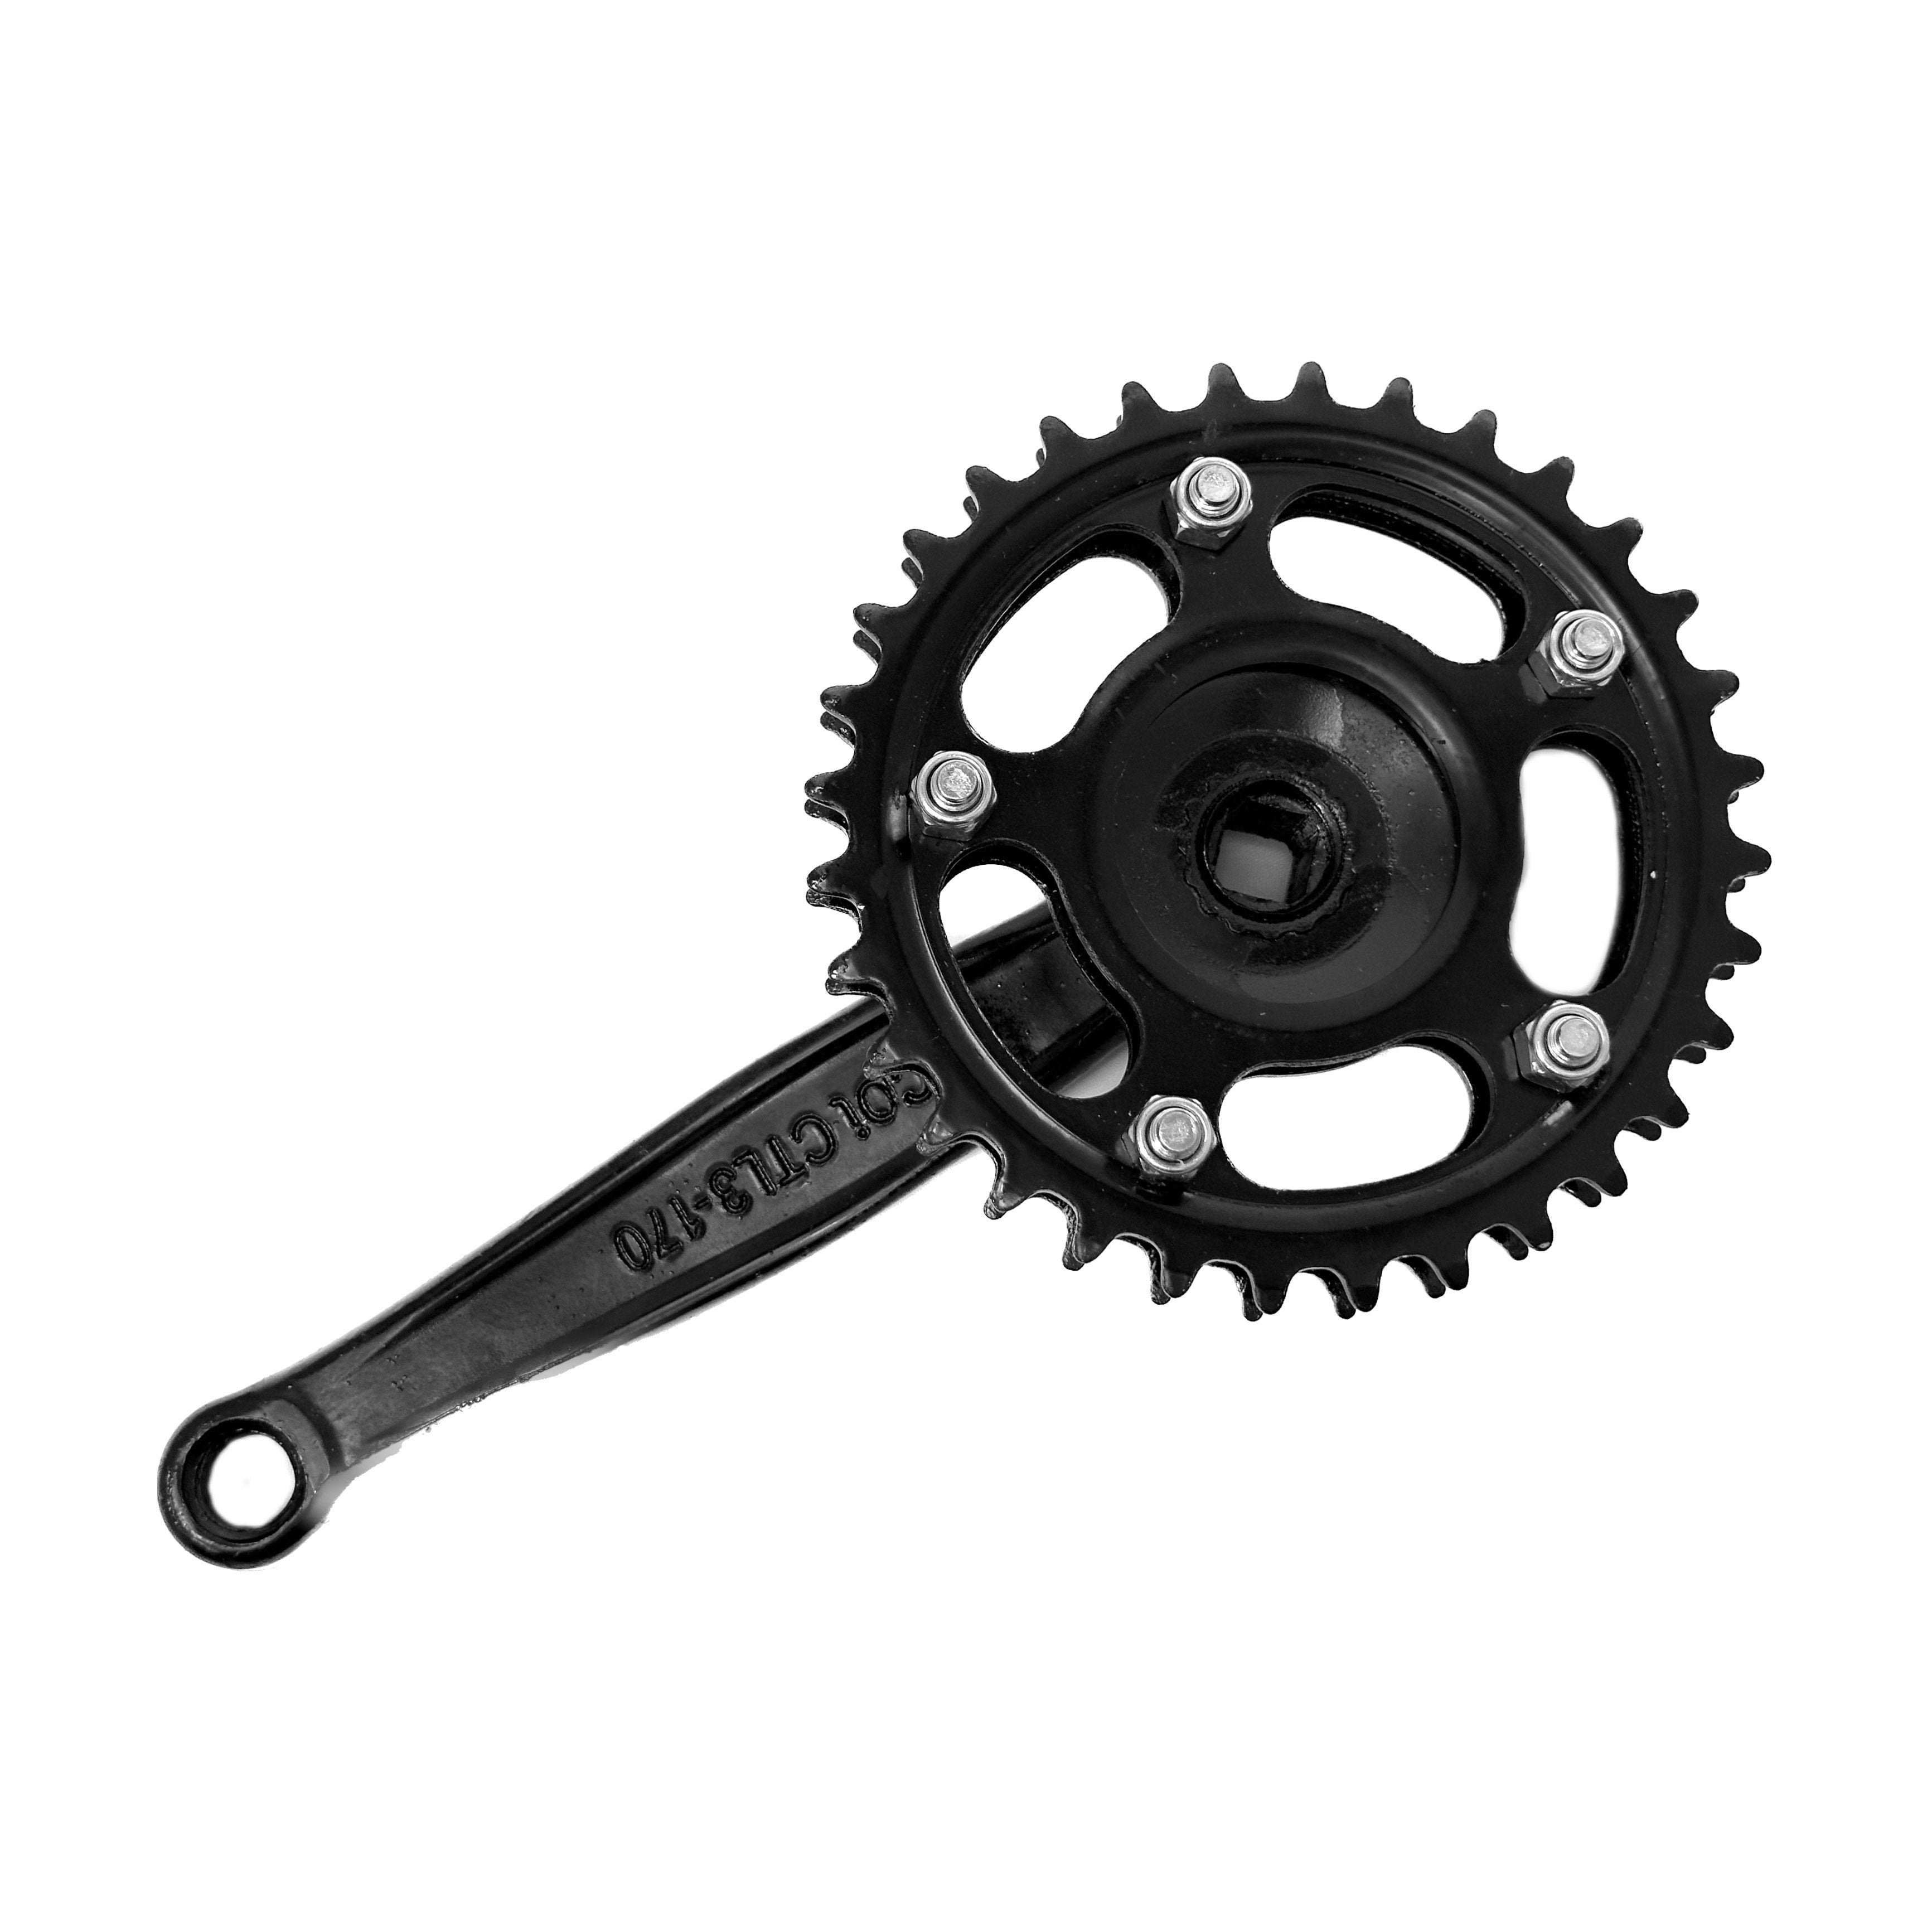 Chains, Sprockets, Cranks, and Freewheels